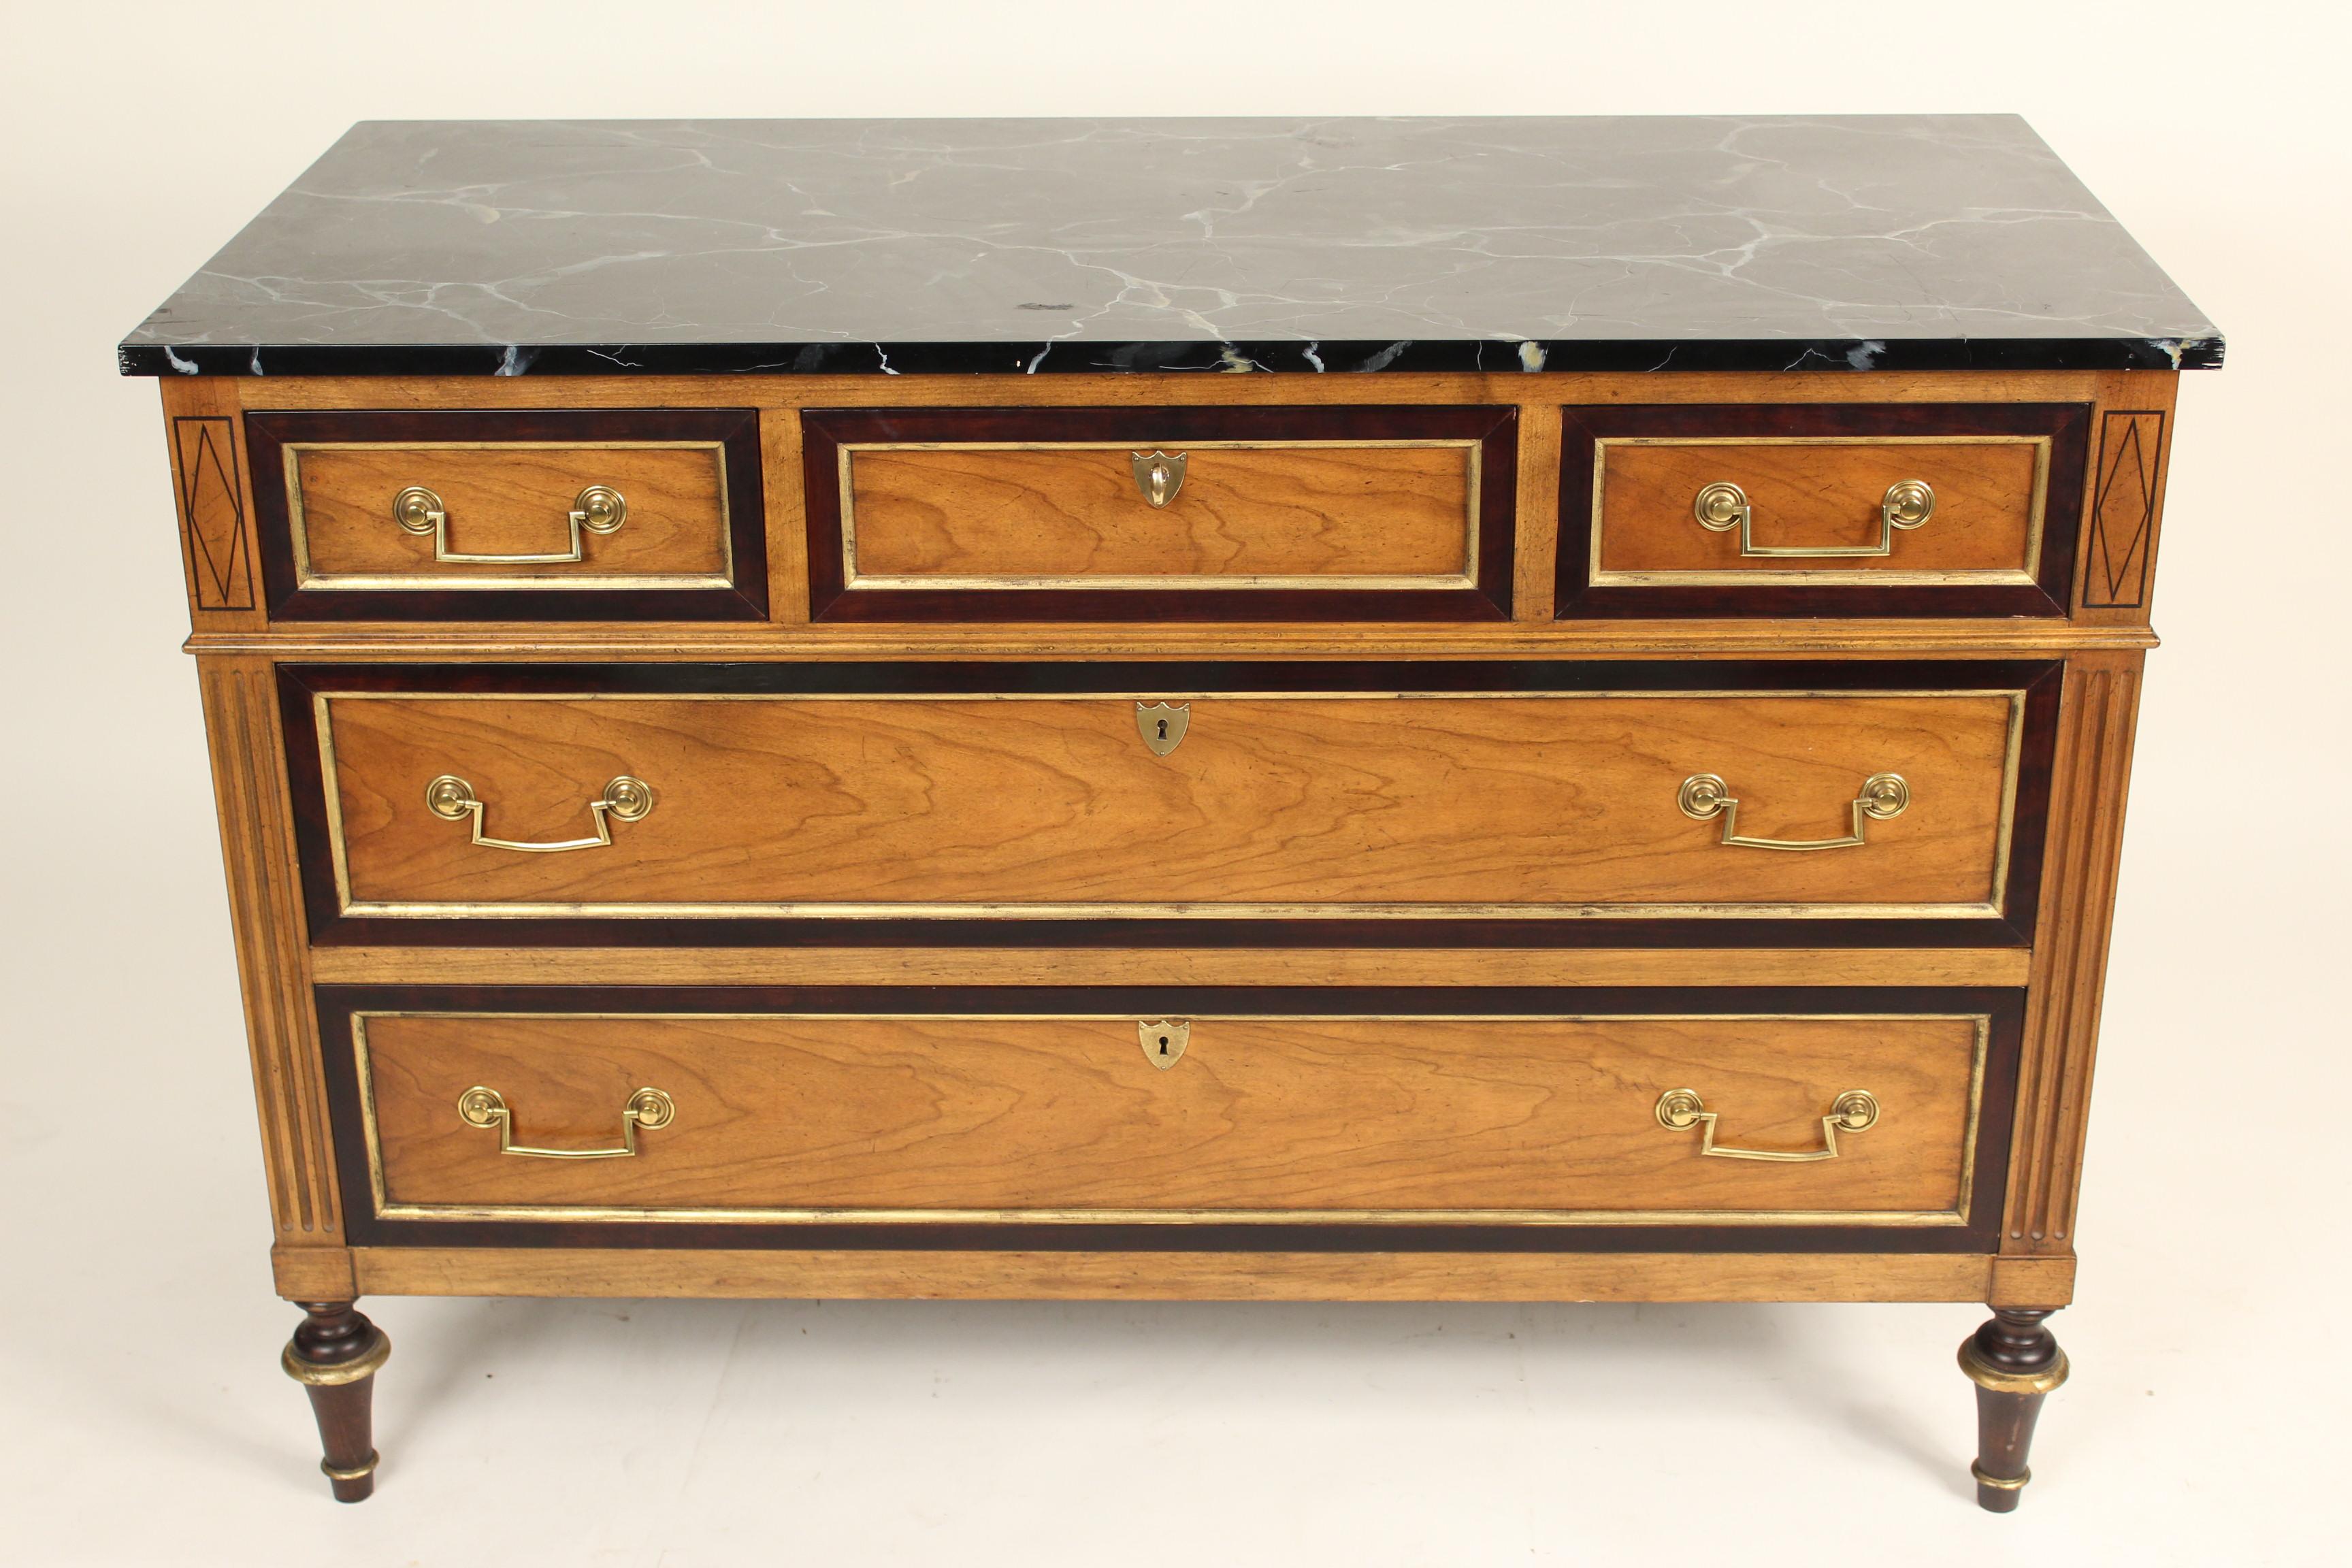 Louis XVI style fruitwood chest of drawers with a faux marble top (wood painted to look like marble) top and brass pulls, made by Baker, late 20th century.